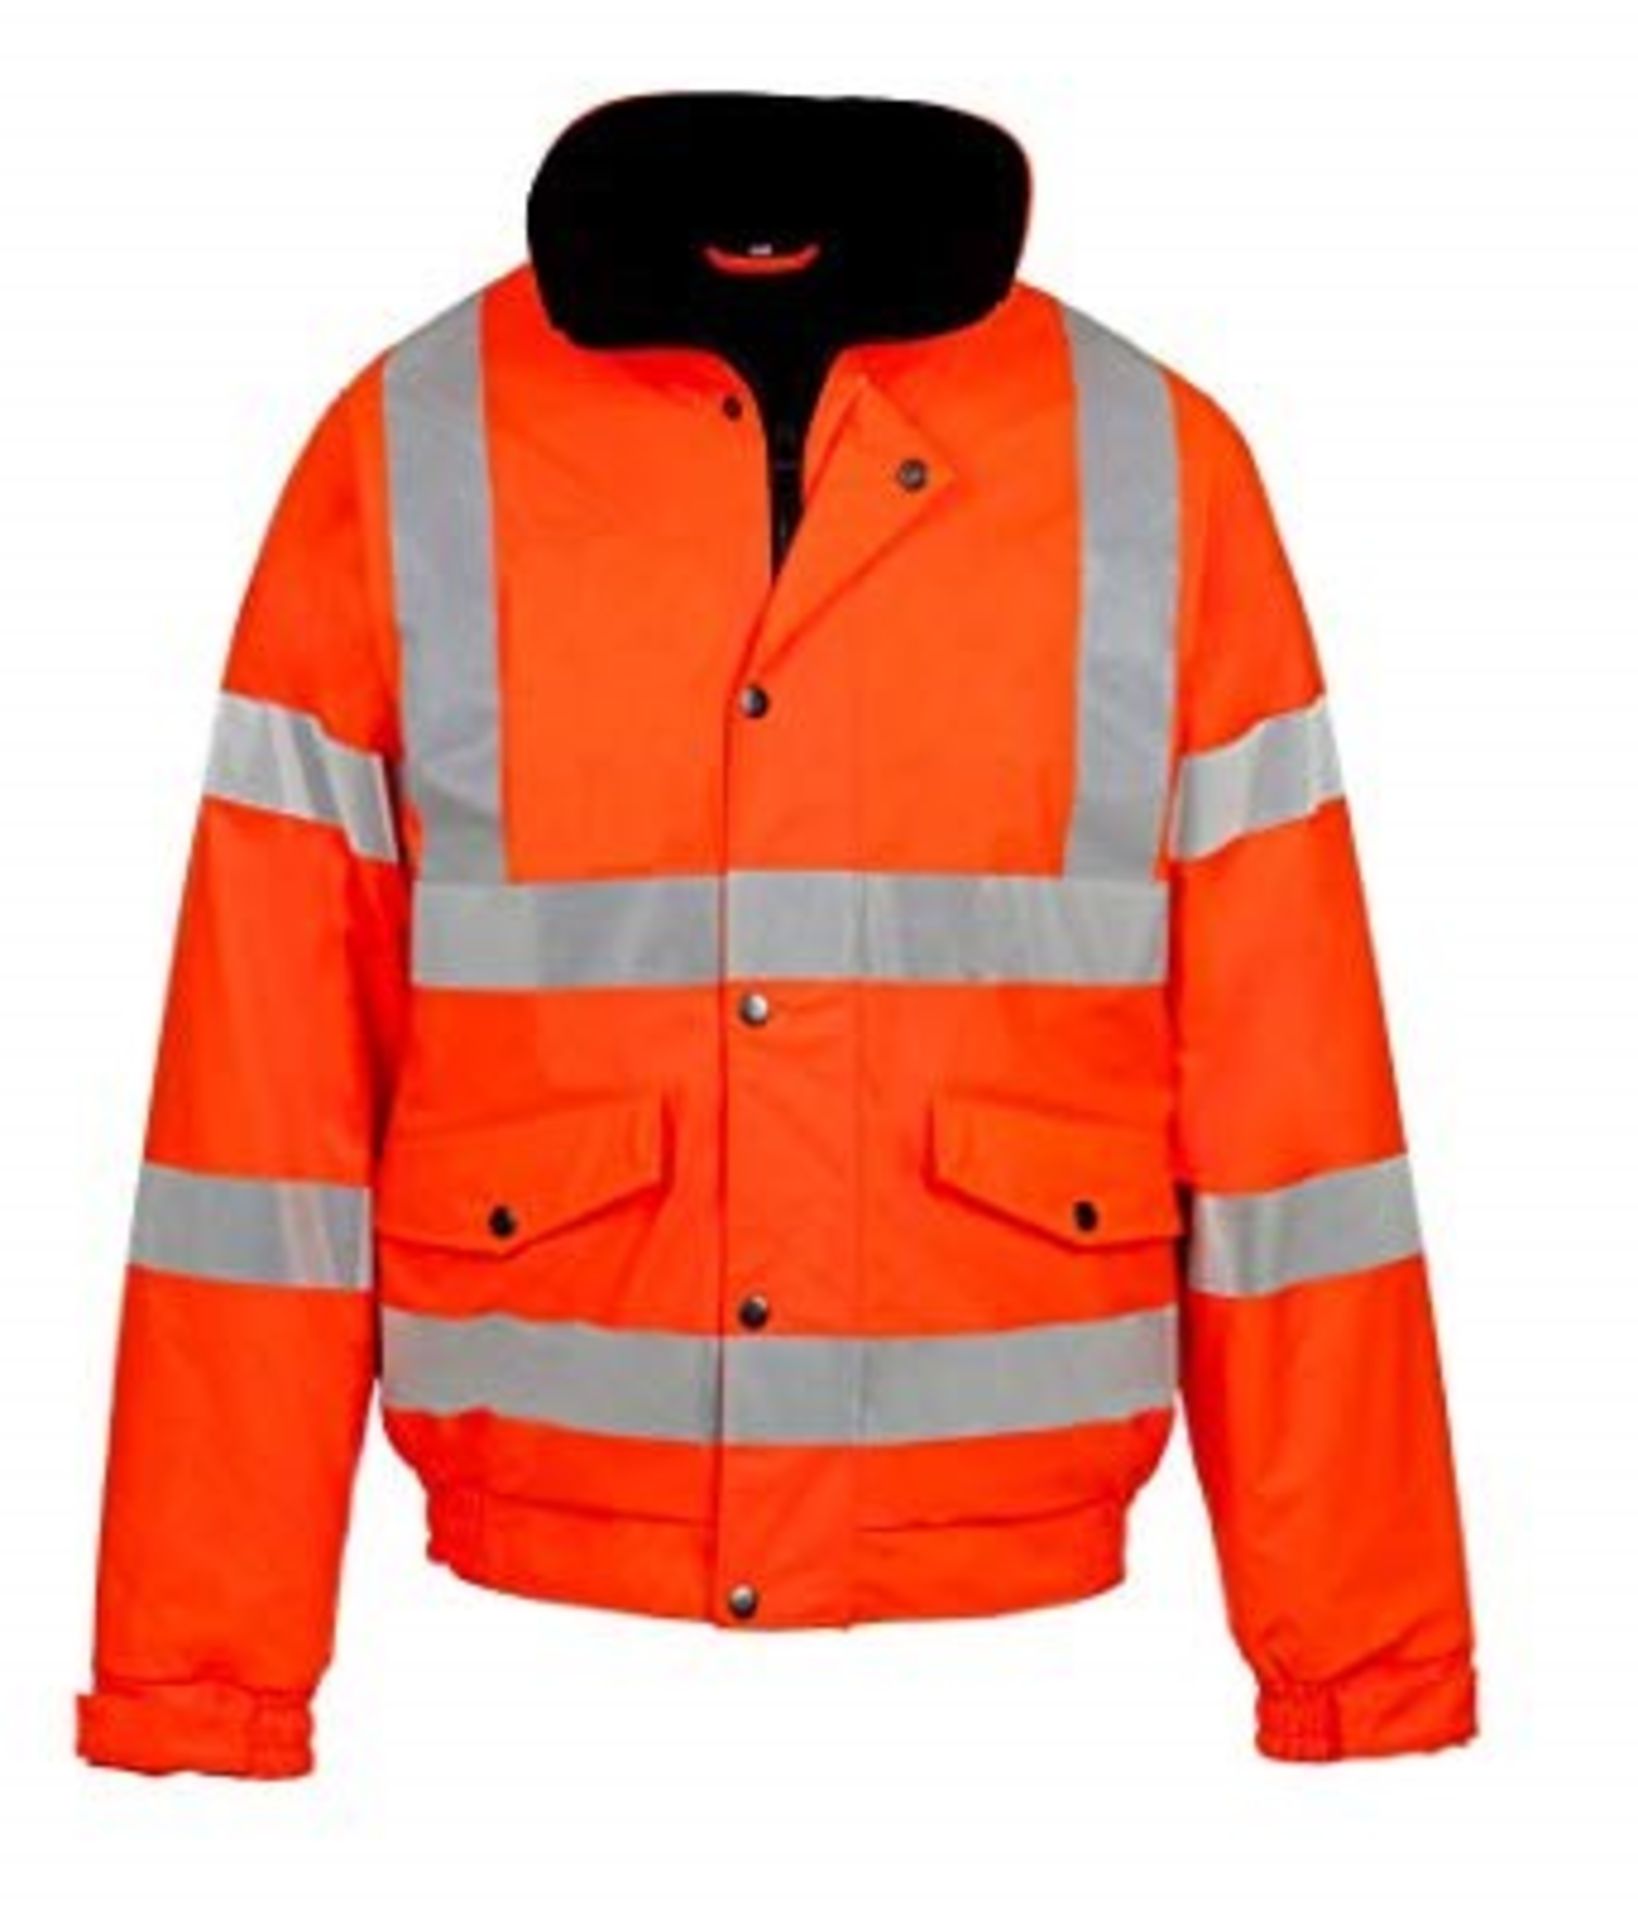 1 AS NEW BAGGED HI-VIS ORANGE CONTRACTOR BOMBER JACKET, SIZE 4XL (VIEWING HIGHLY RECOMMENDED)